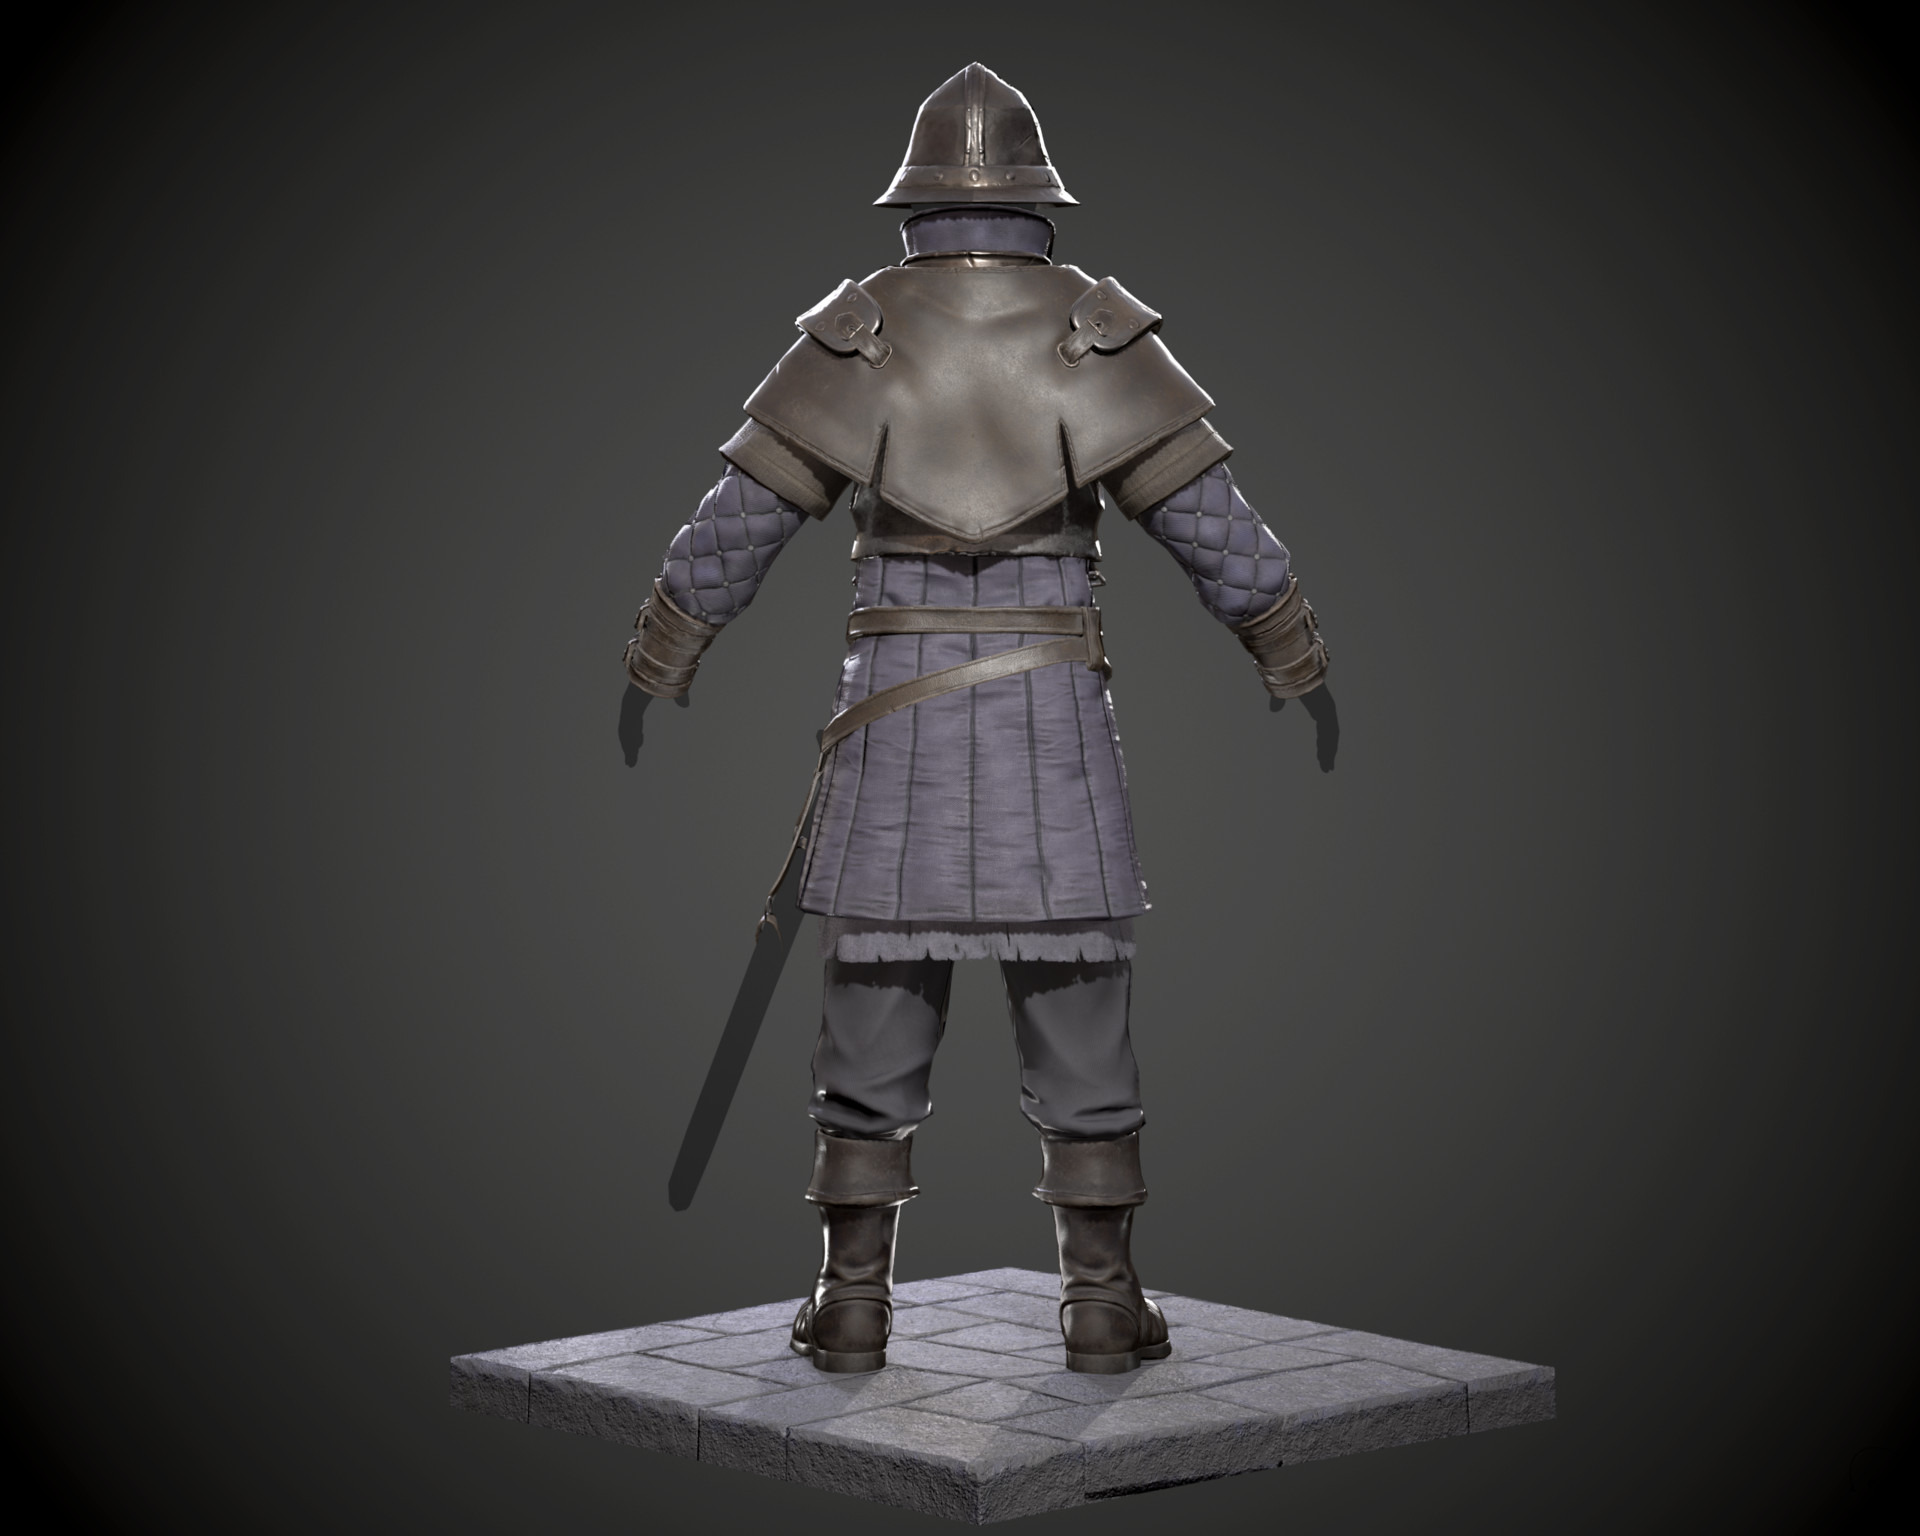 Knight Armor - Finished Projects - Blender Artists Community